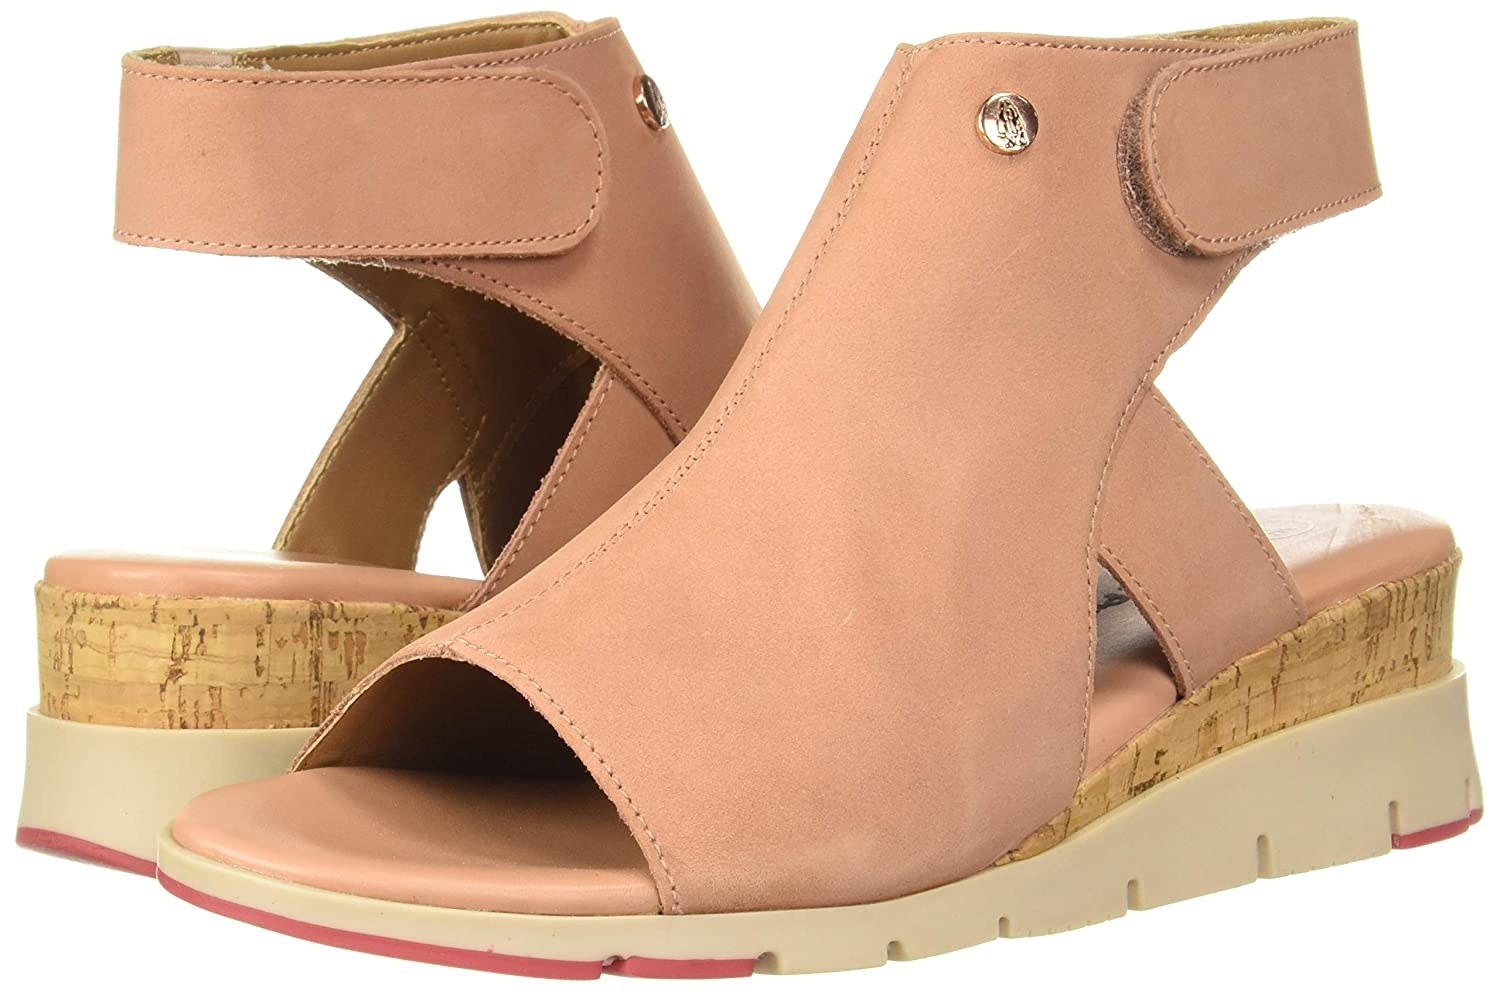 A pair of baby pink wedges with a high top strap around the ankle